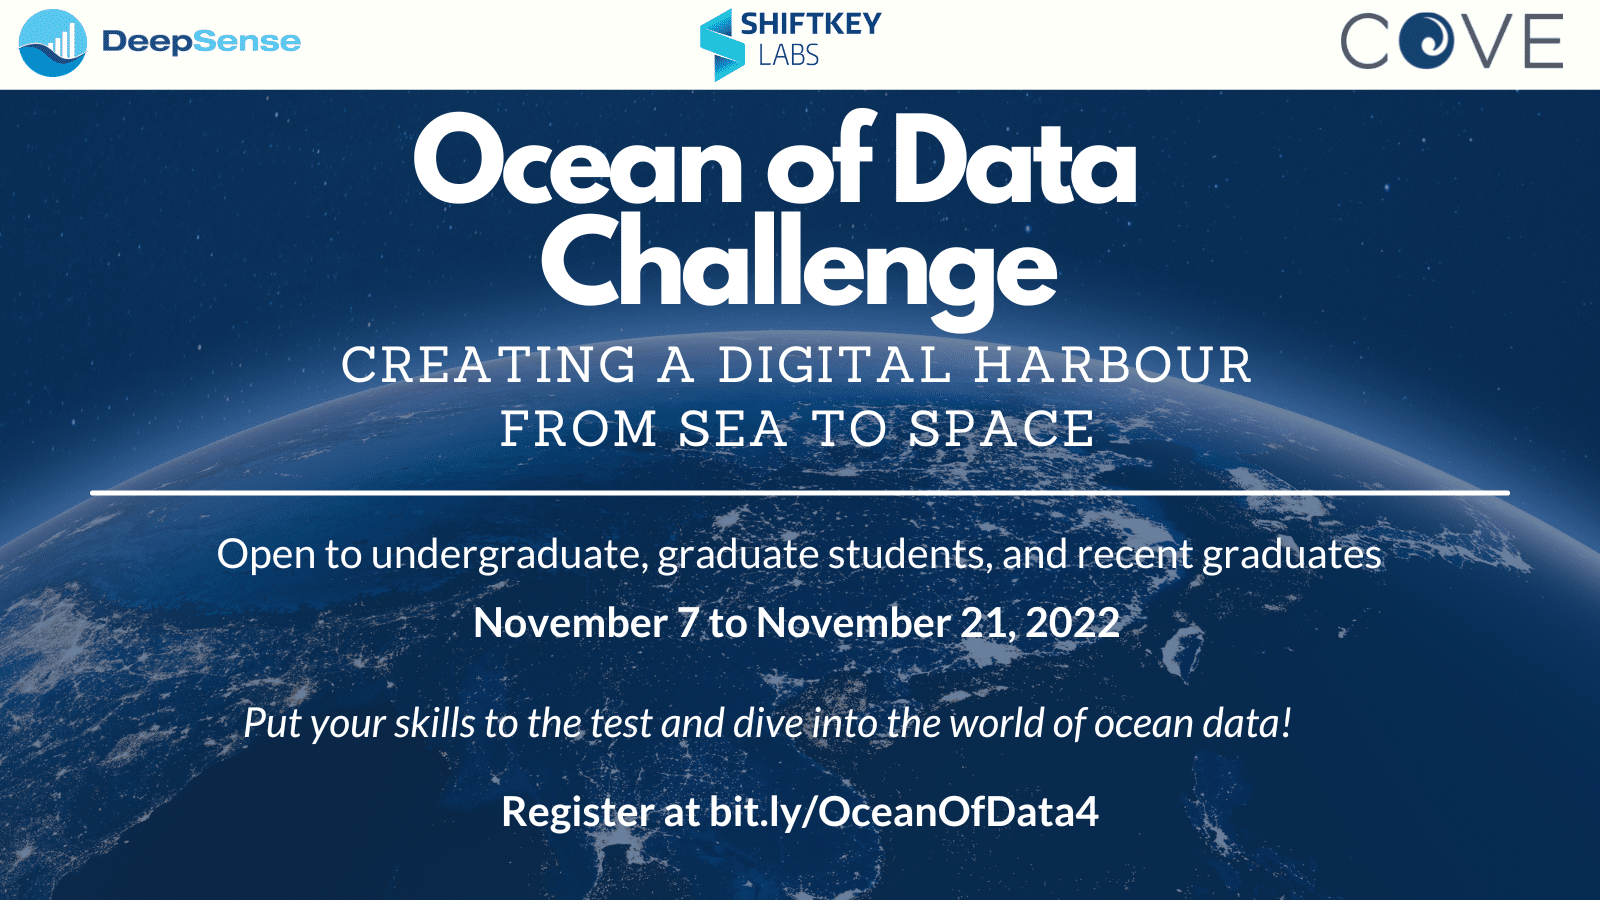 Ocean of Data Challenge: Creating a Digital Harbour from Sea to Space